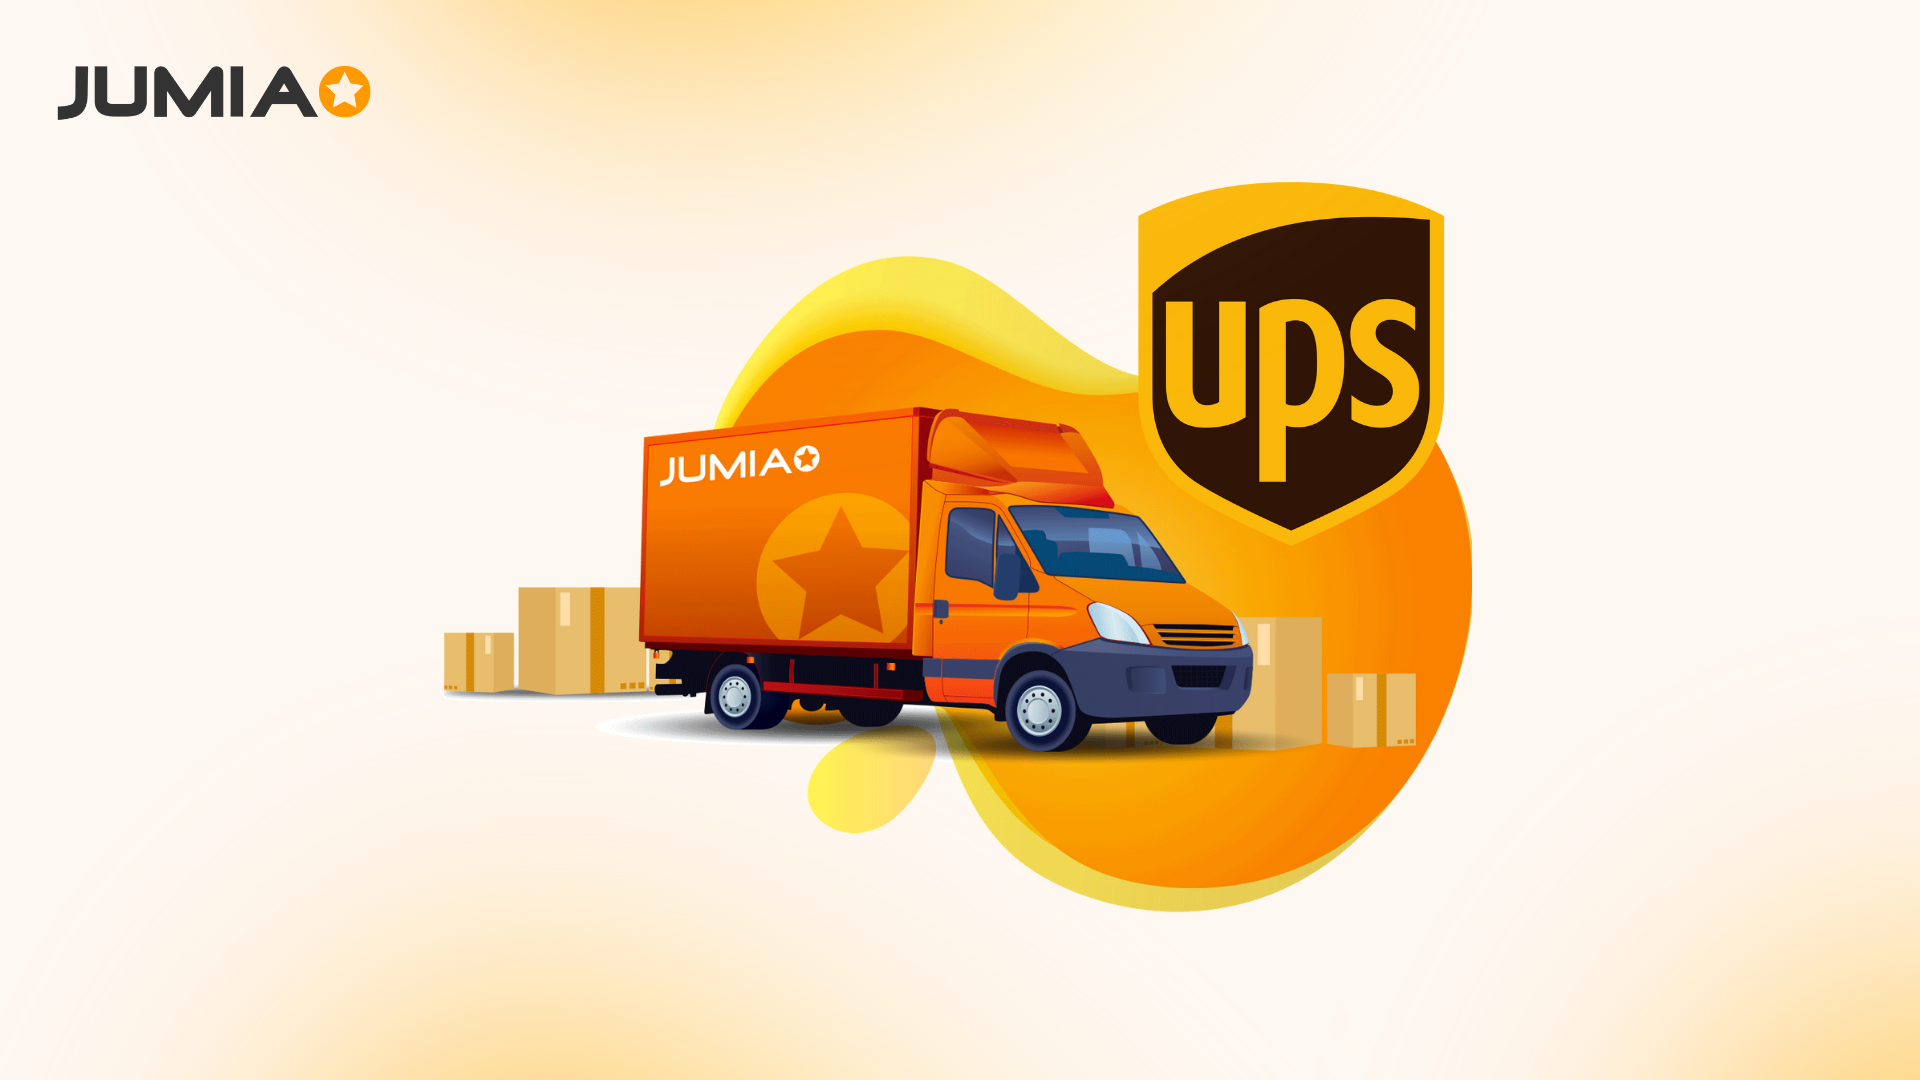 The leading pan-African e-commerce platform and the world's premier package delivery company will join forces to expand delivery services for businesses and consumers across the continent